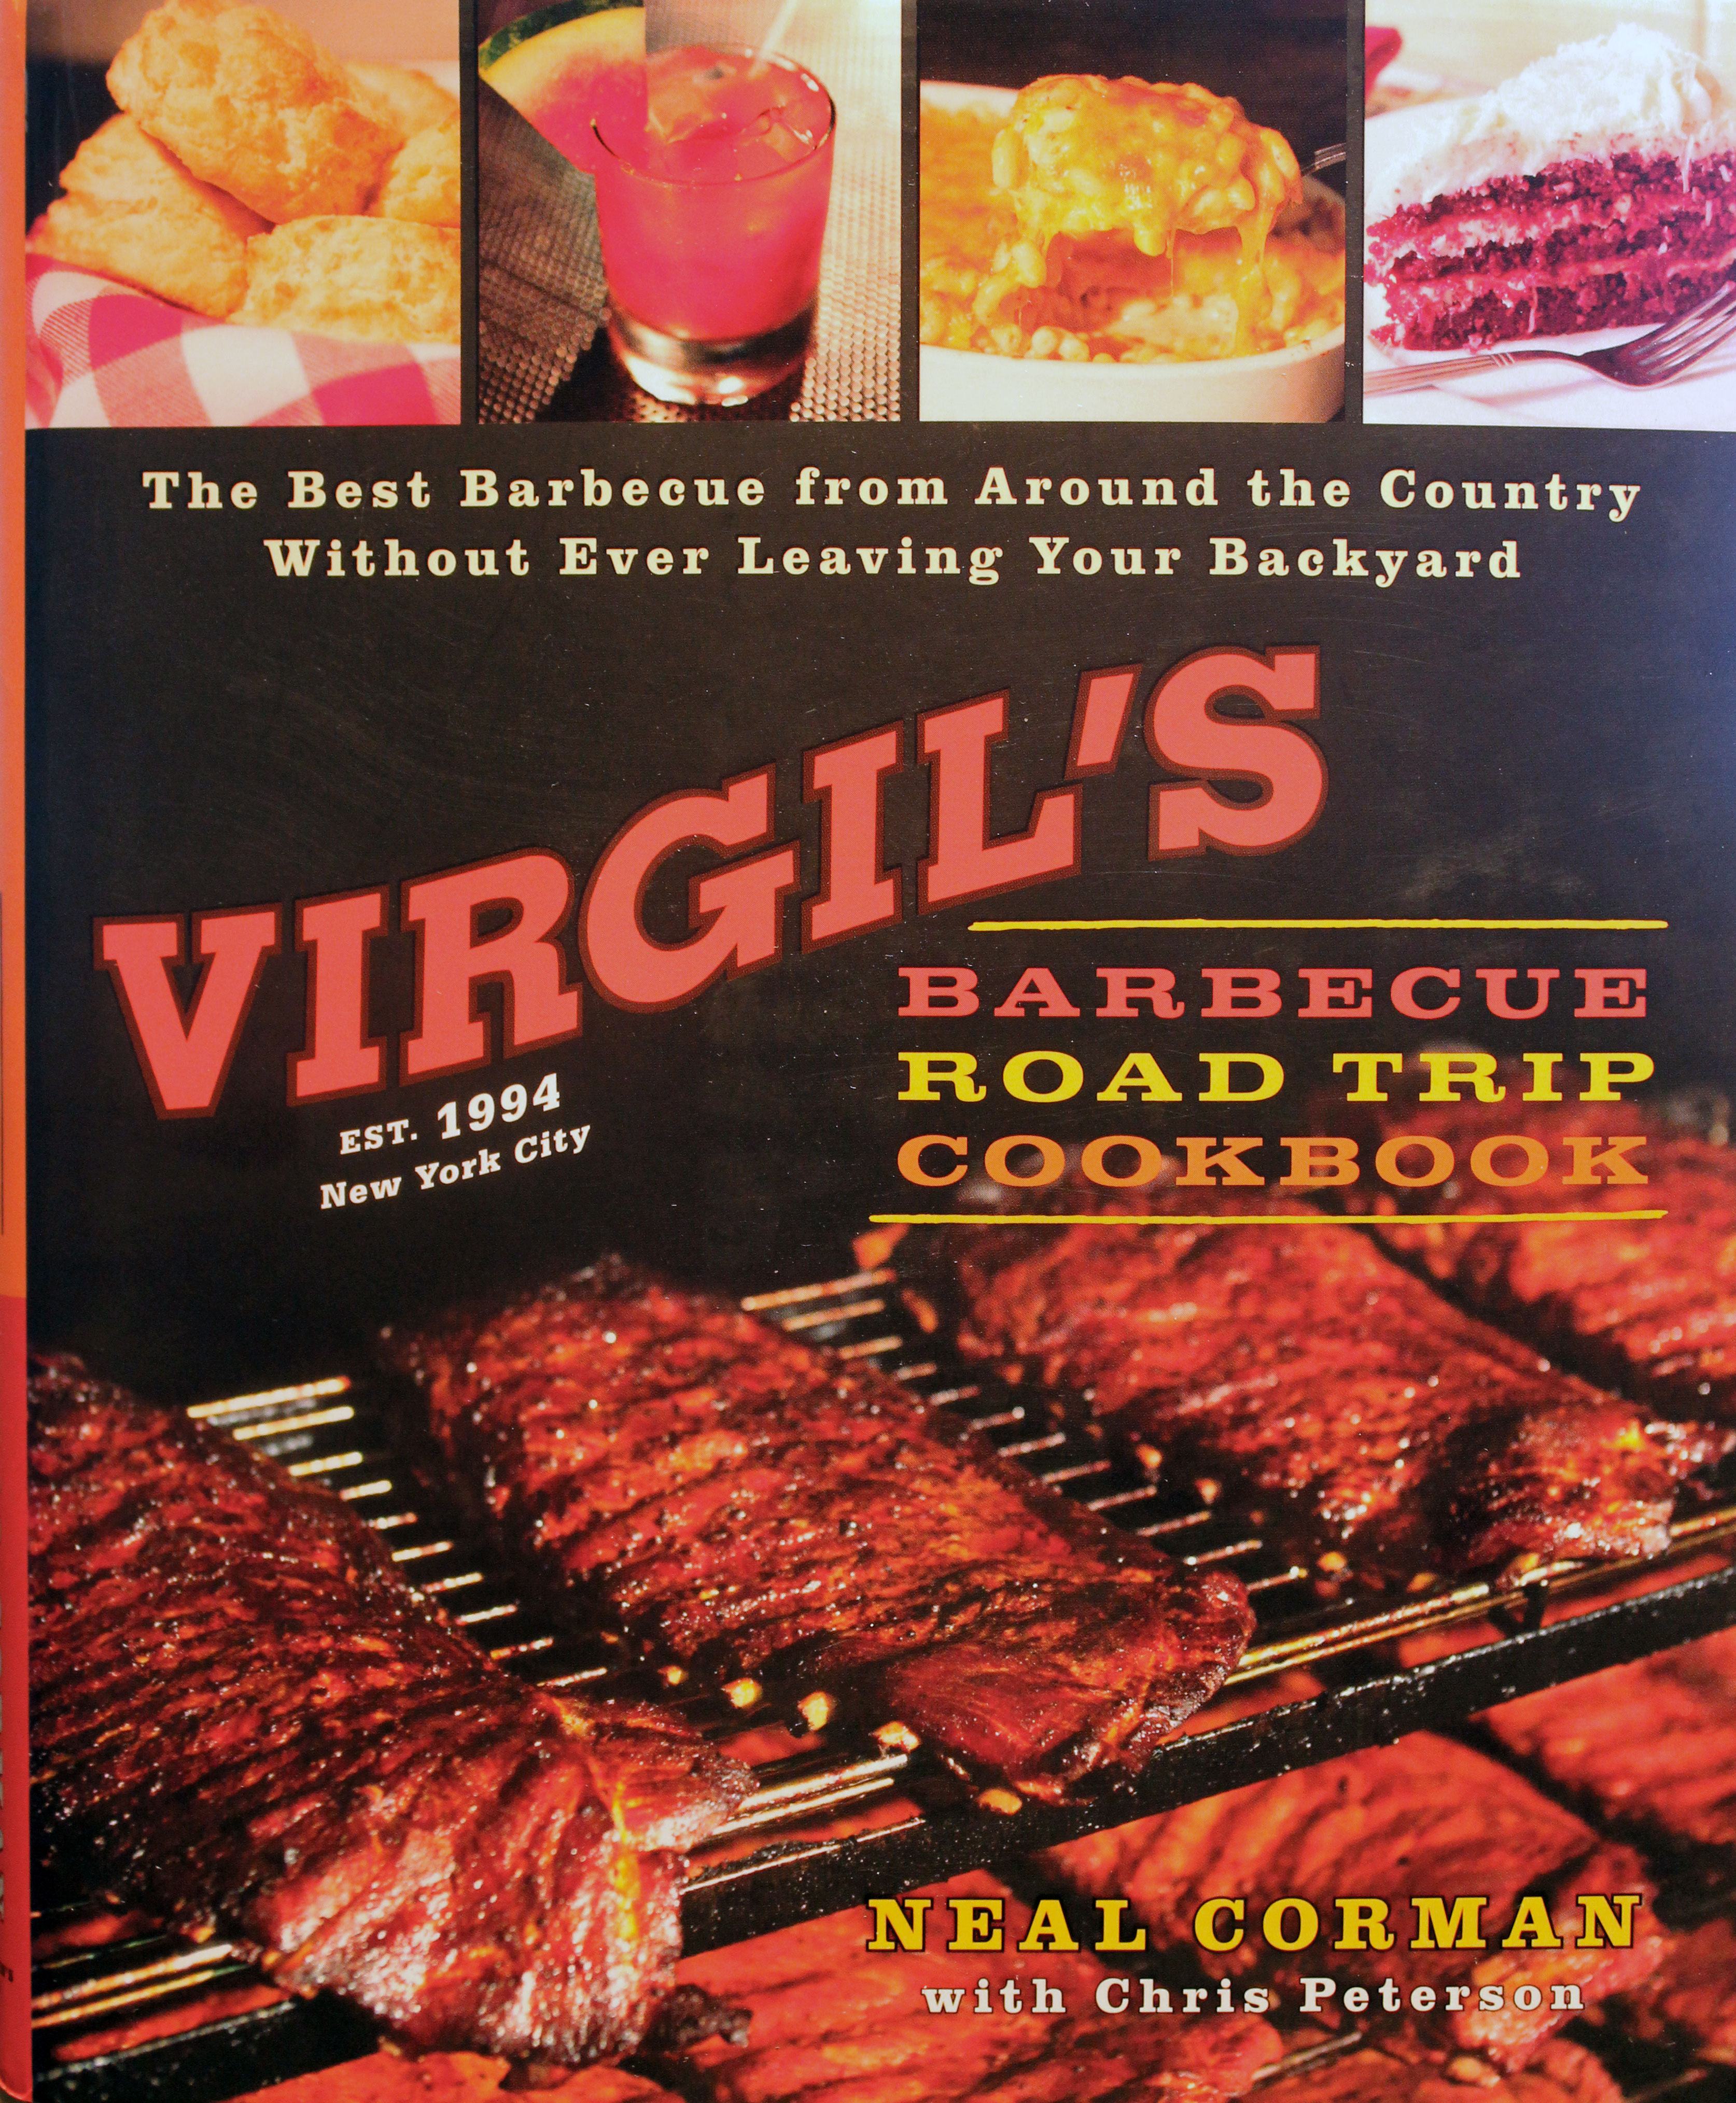 TBT Cookbook Review: Virgil’s Barbecue Road Trip